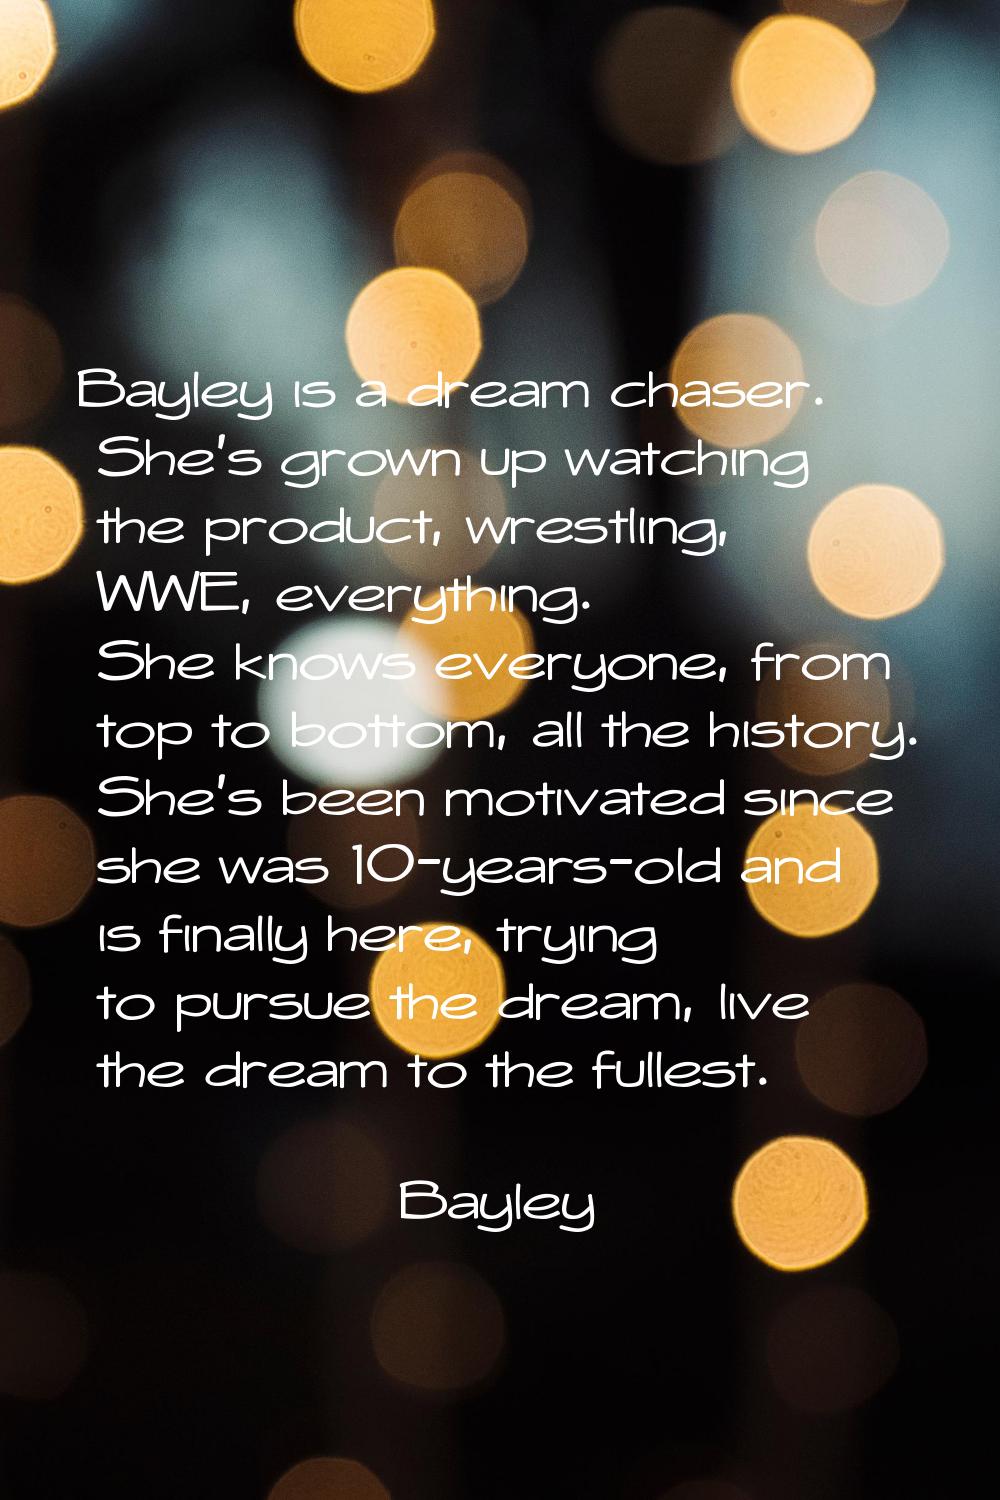 Bayley is a dream chaser. She's grown up watching the product, wrestling, WWE, everything. She know